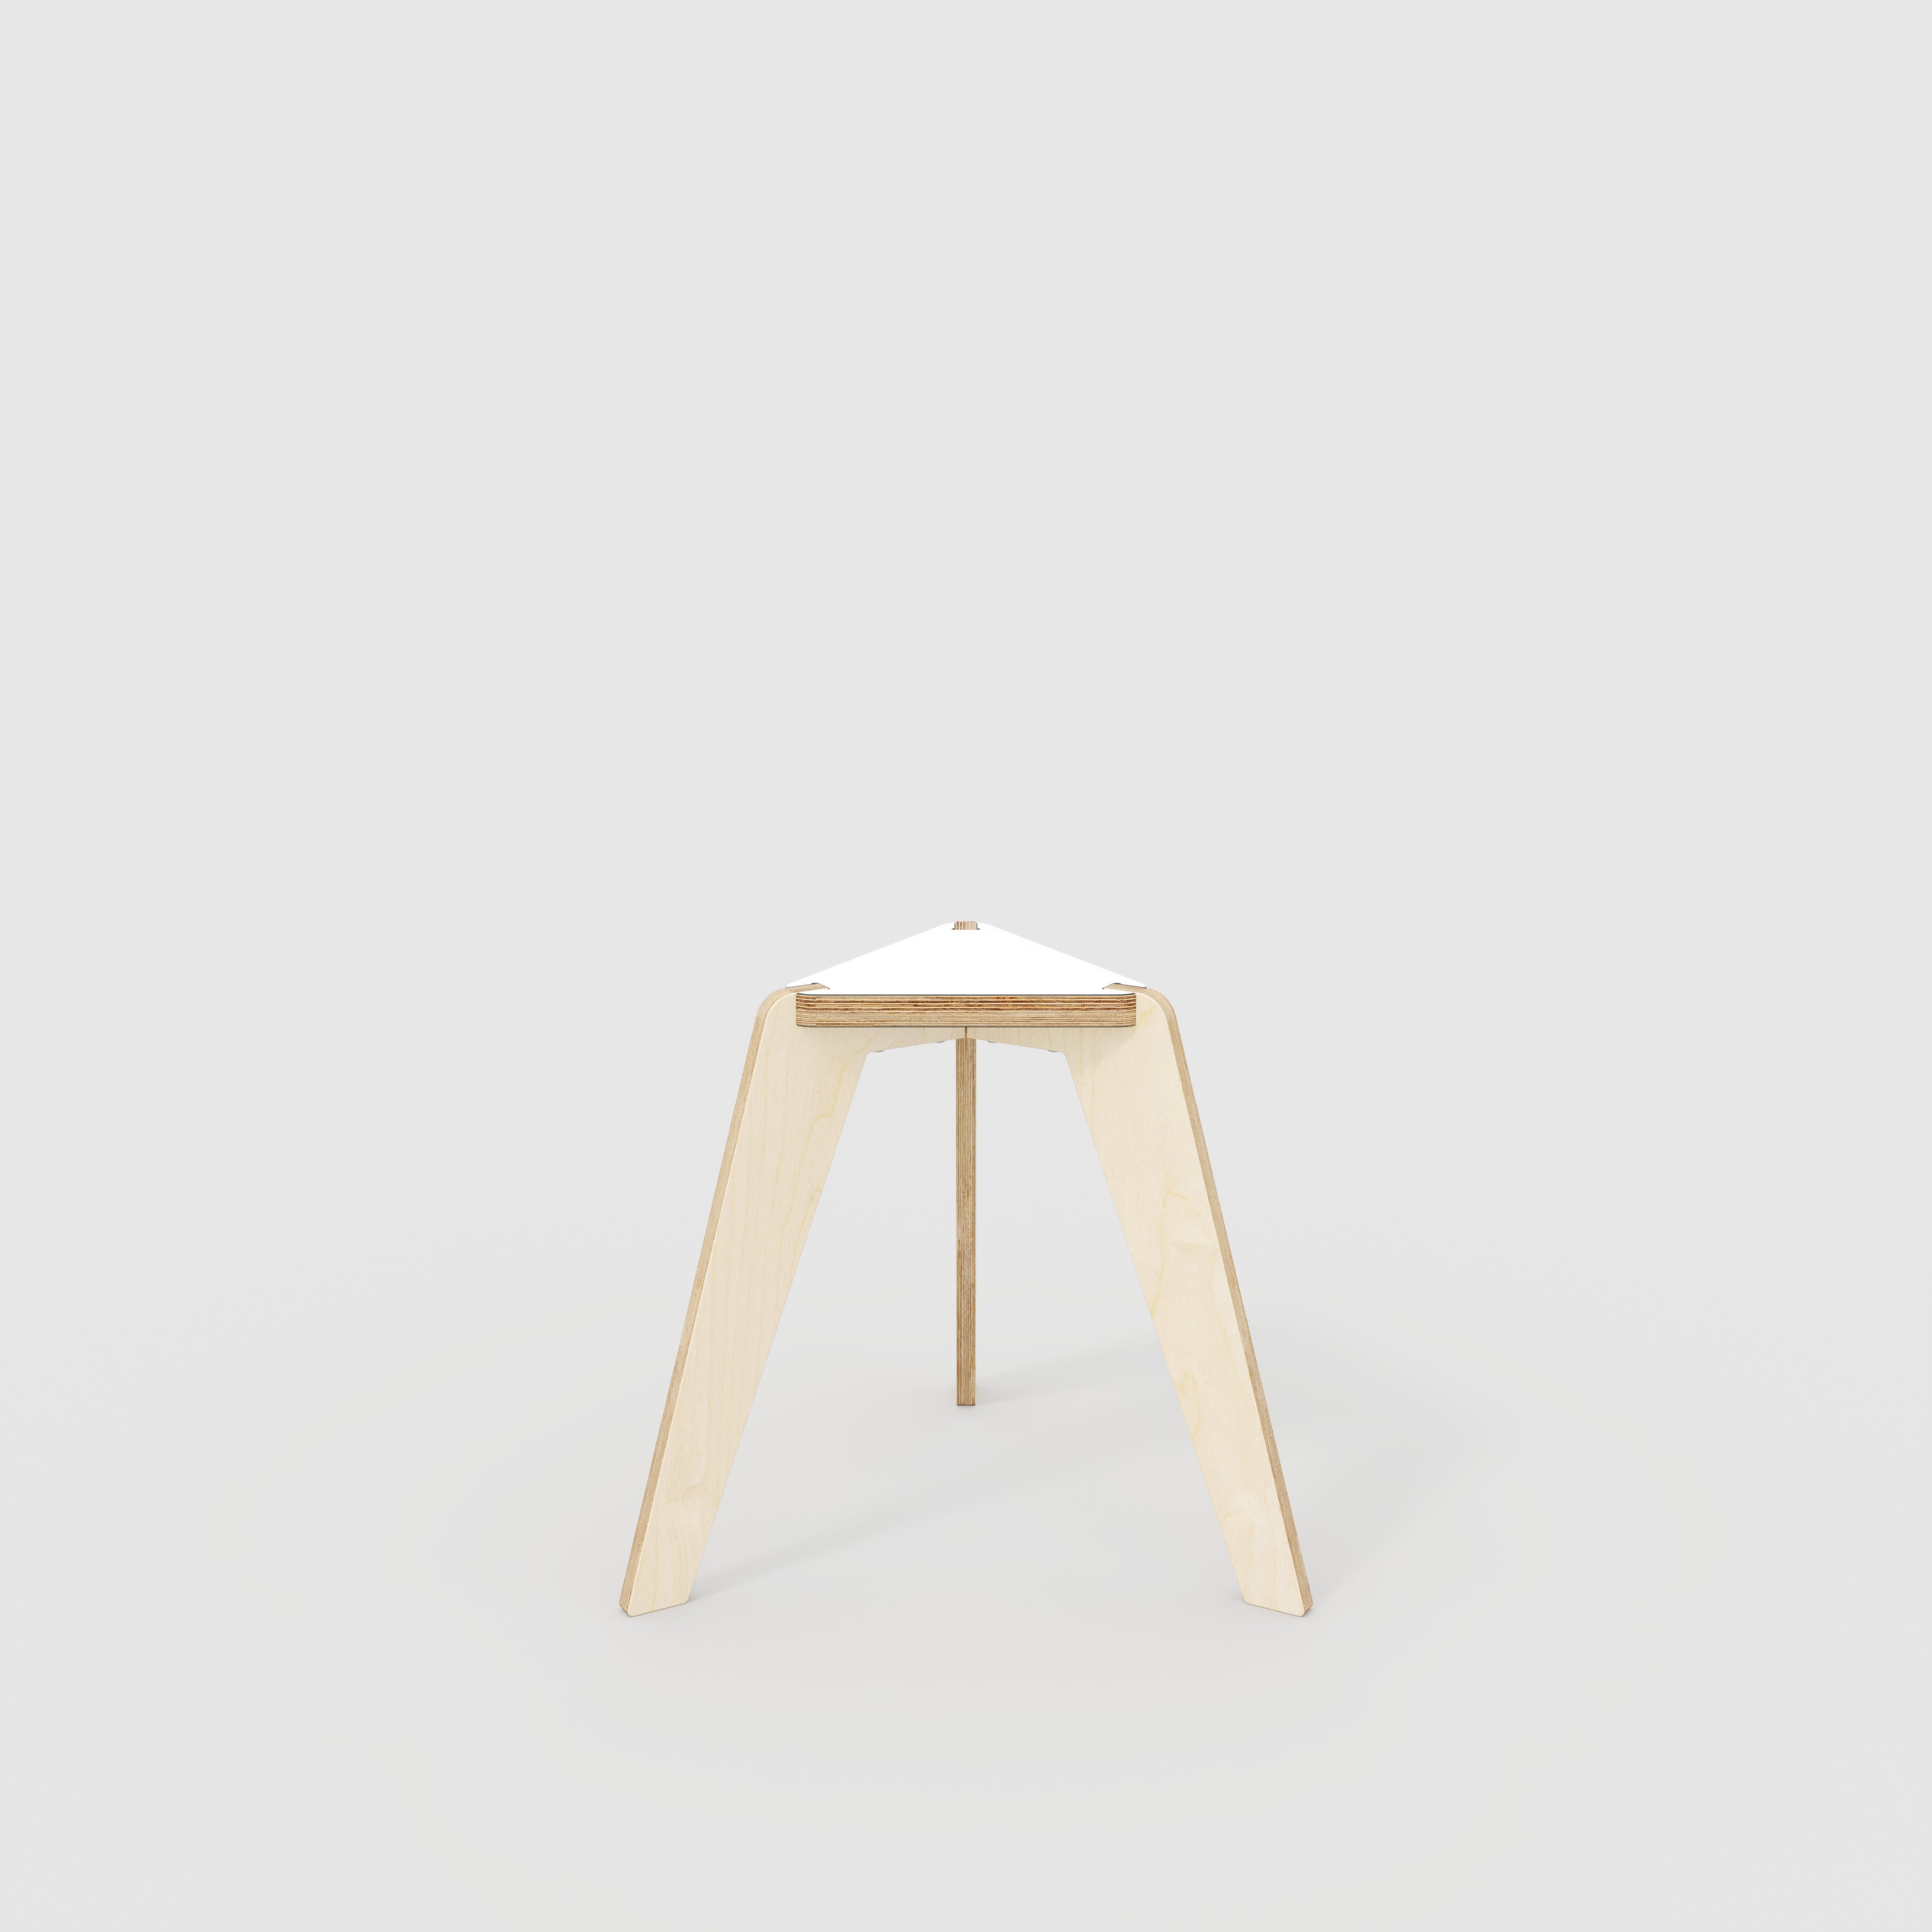 Tri Stool with Plywood Legs - Formica White - 525(w) x 450(d) x 450(h)